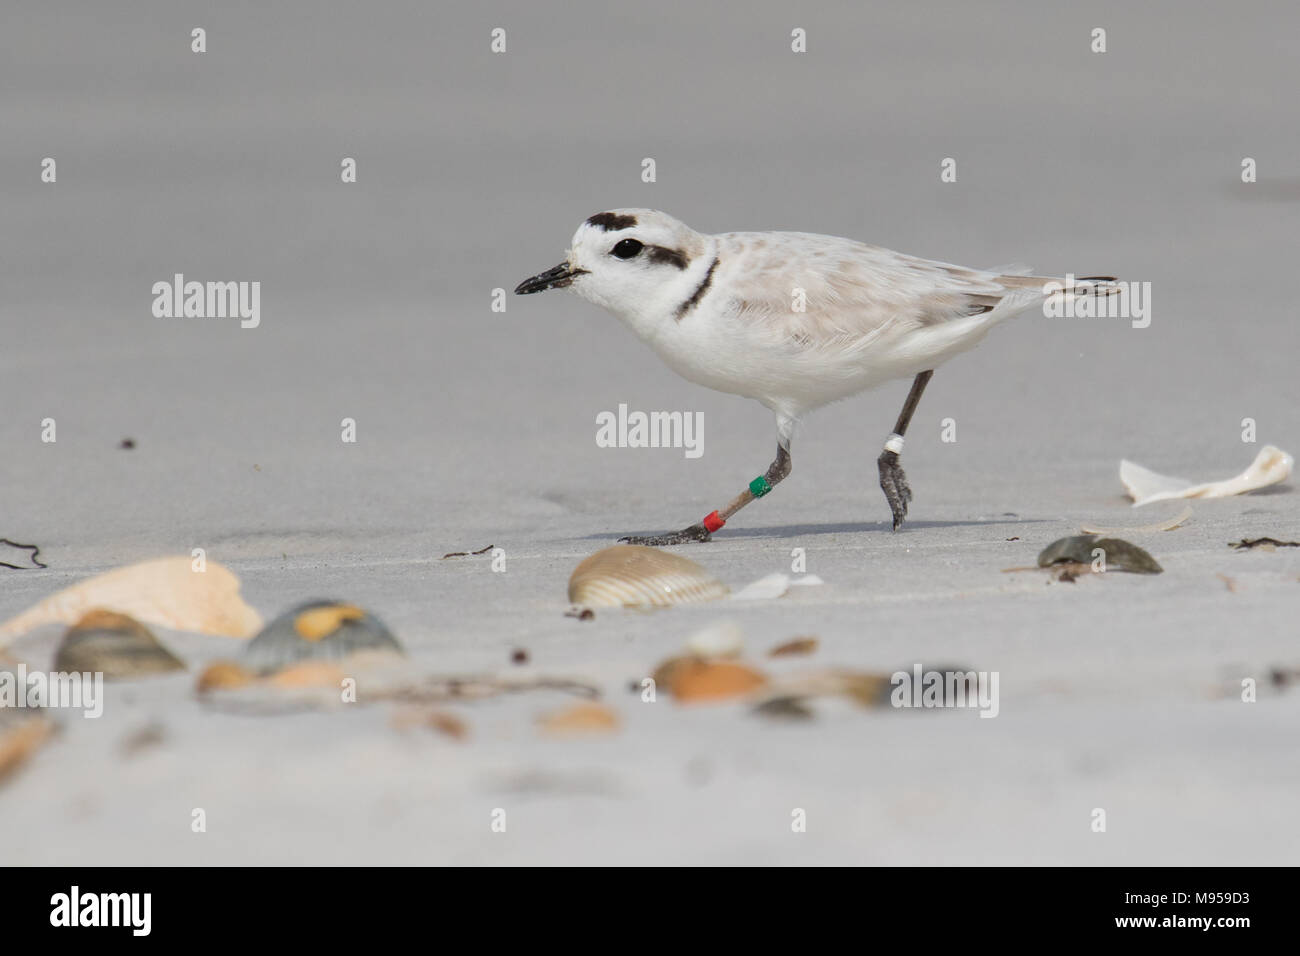 Banded and tagged snowy plover running on seashore Stock Photo